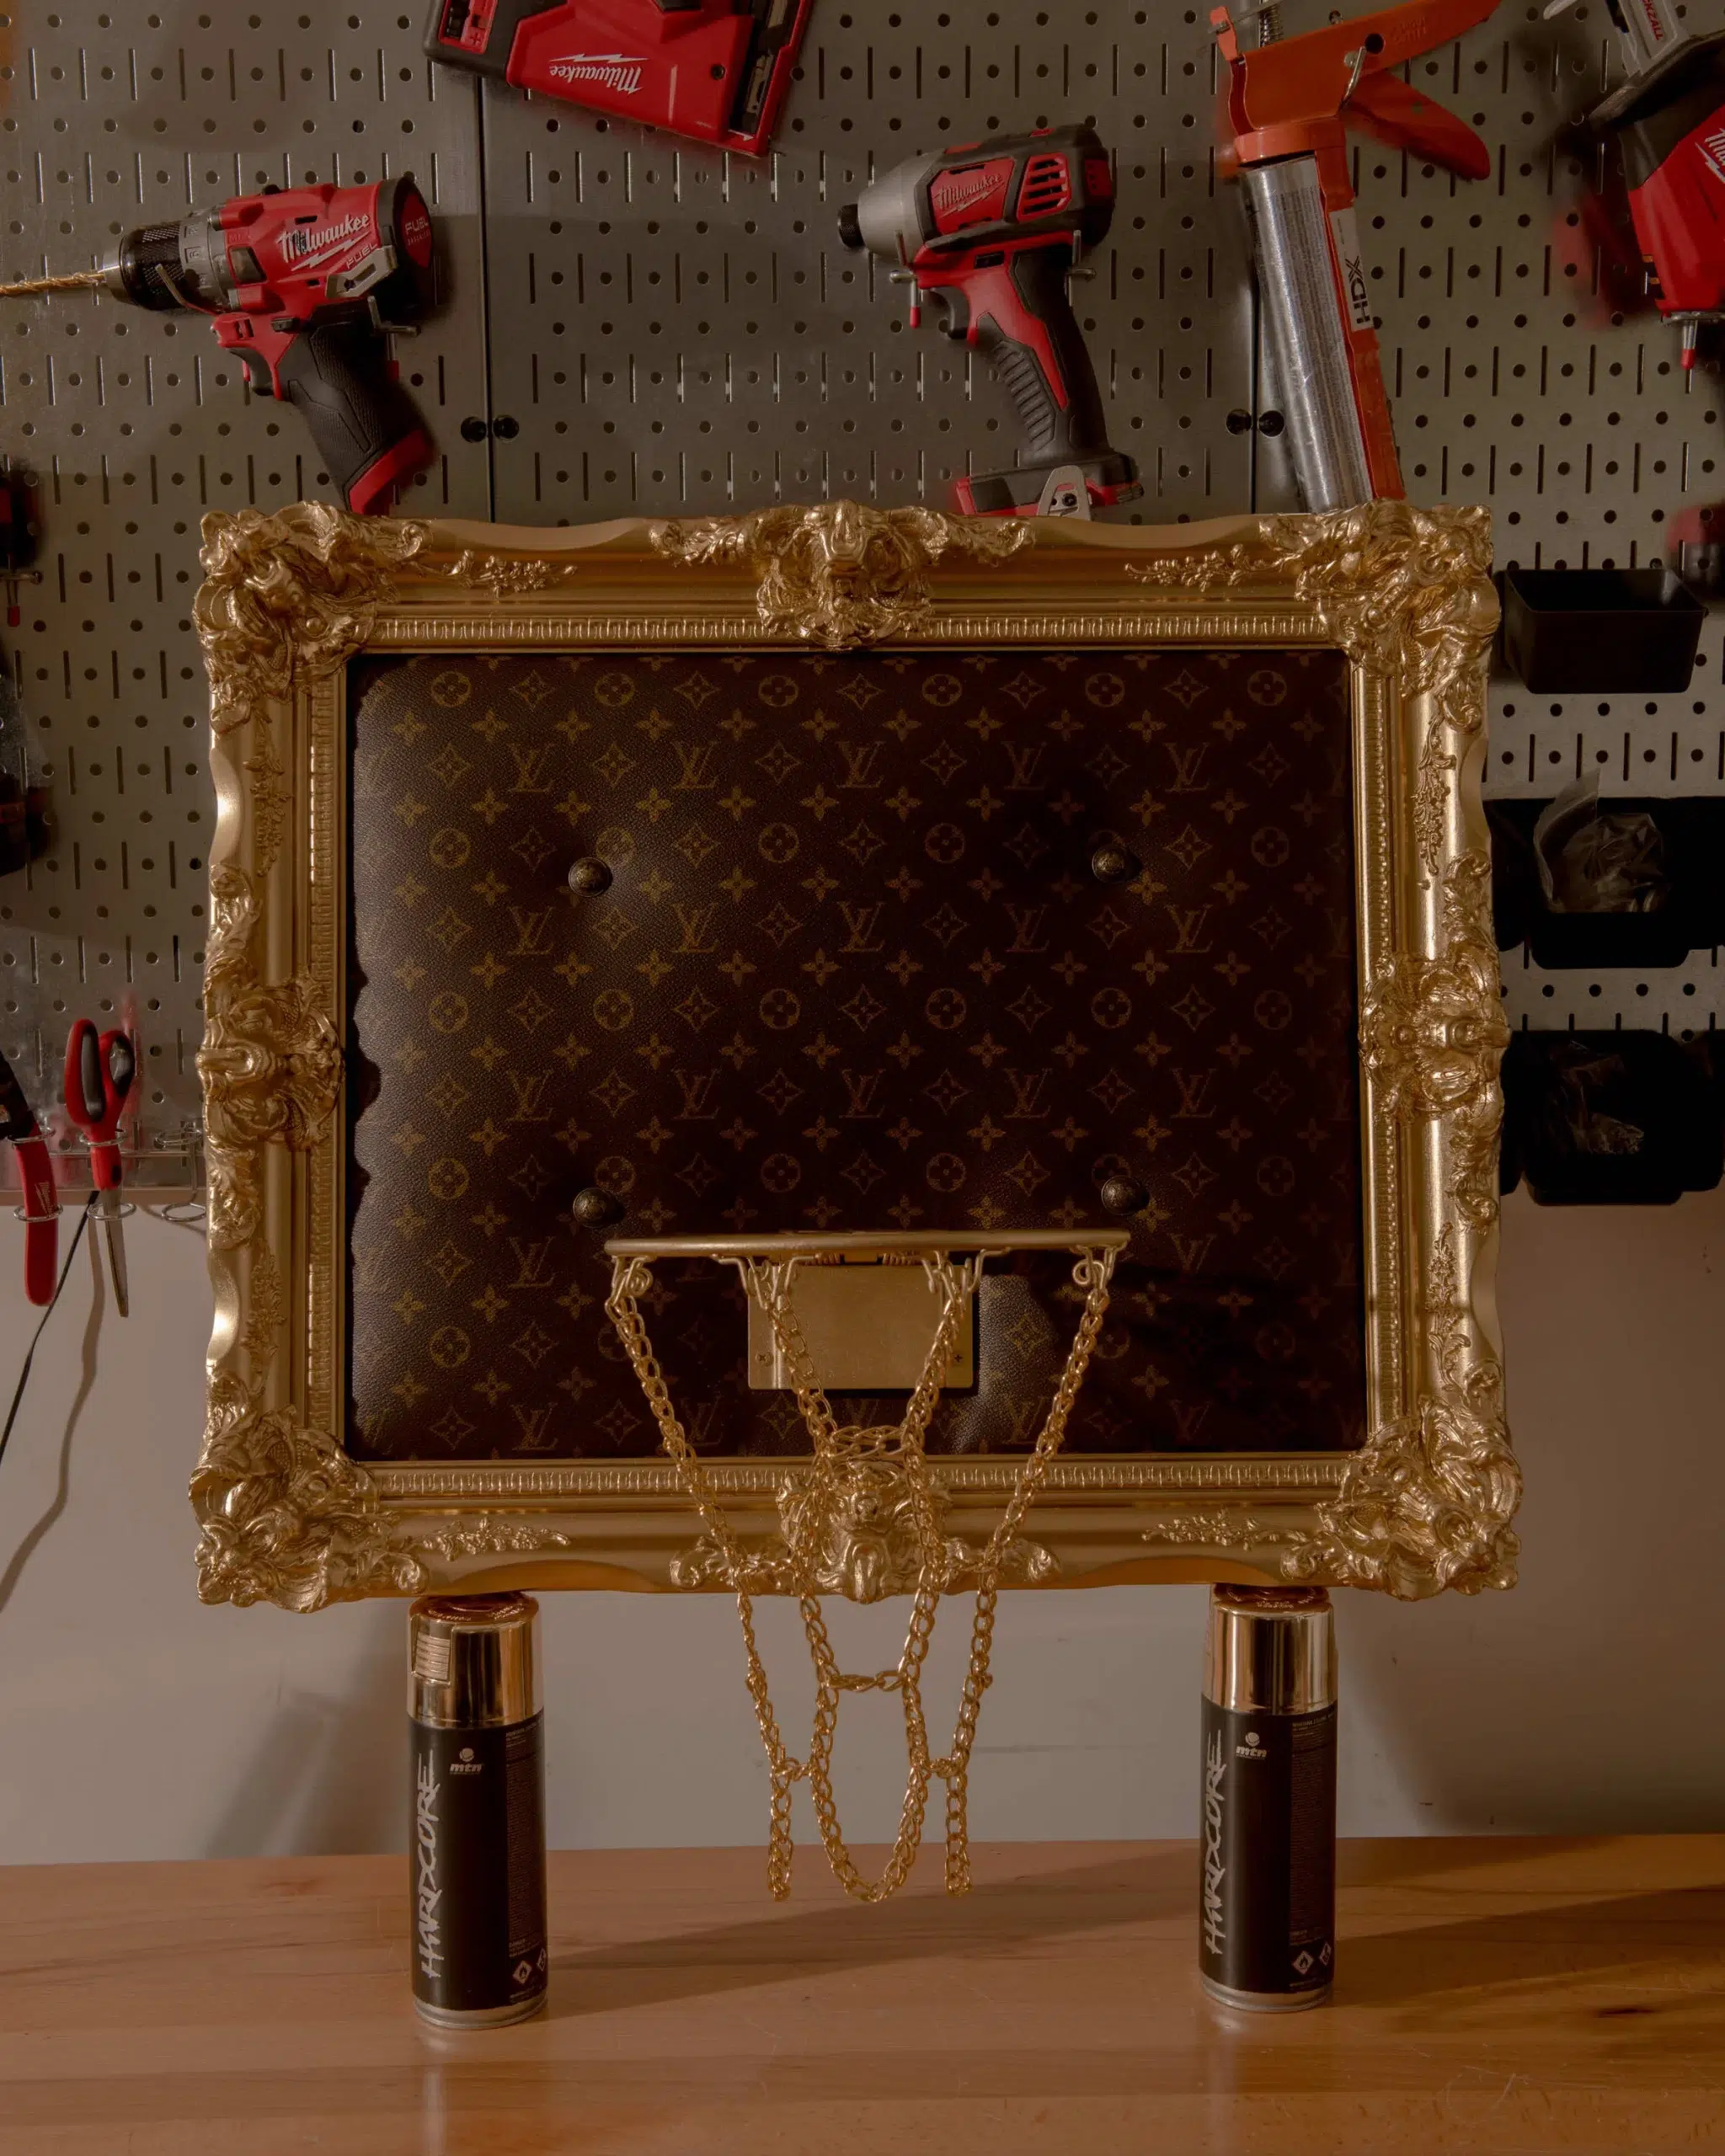 Luxurious basketball hoop adorned with the renowned Louis Vuitton brand.